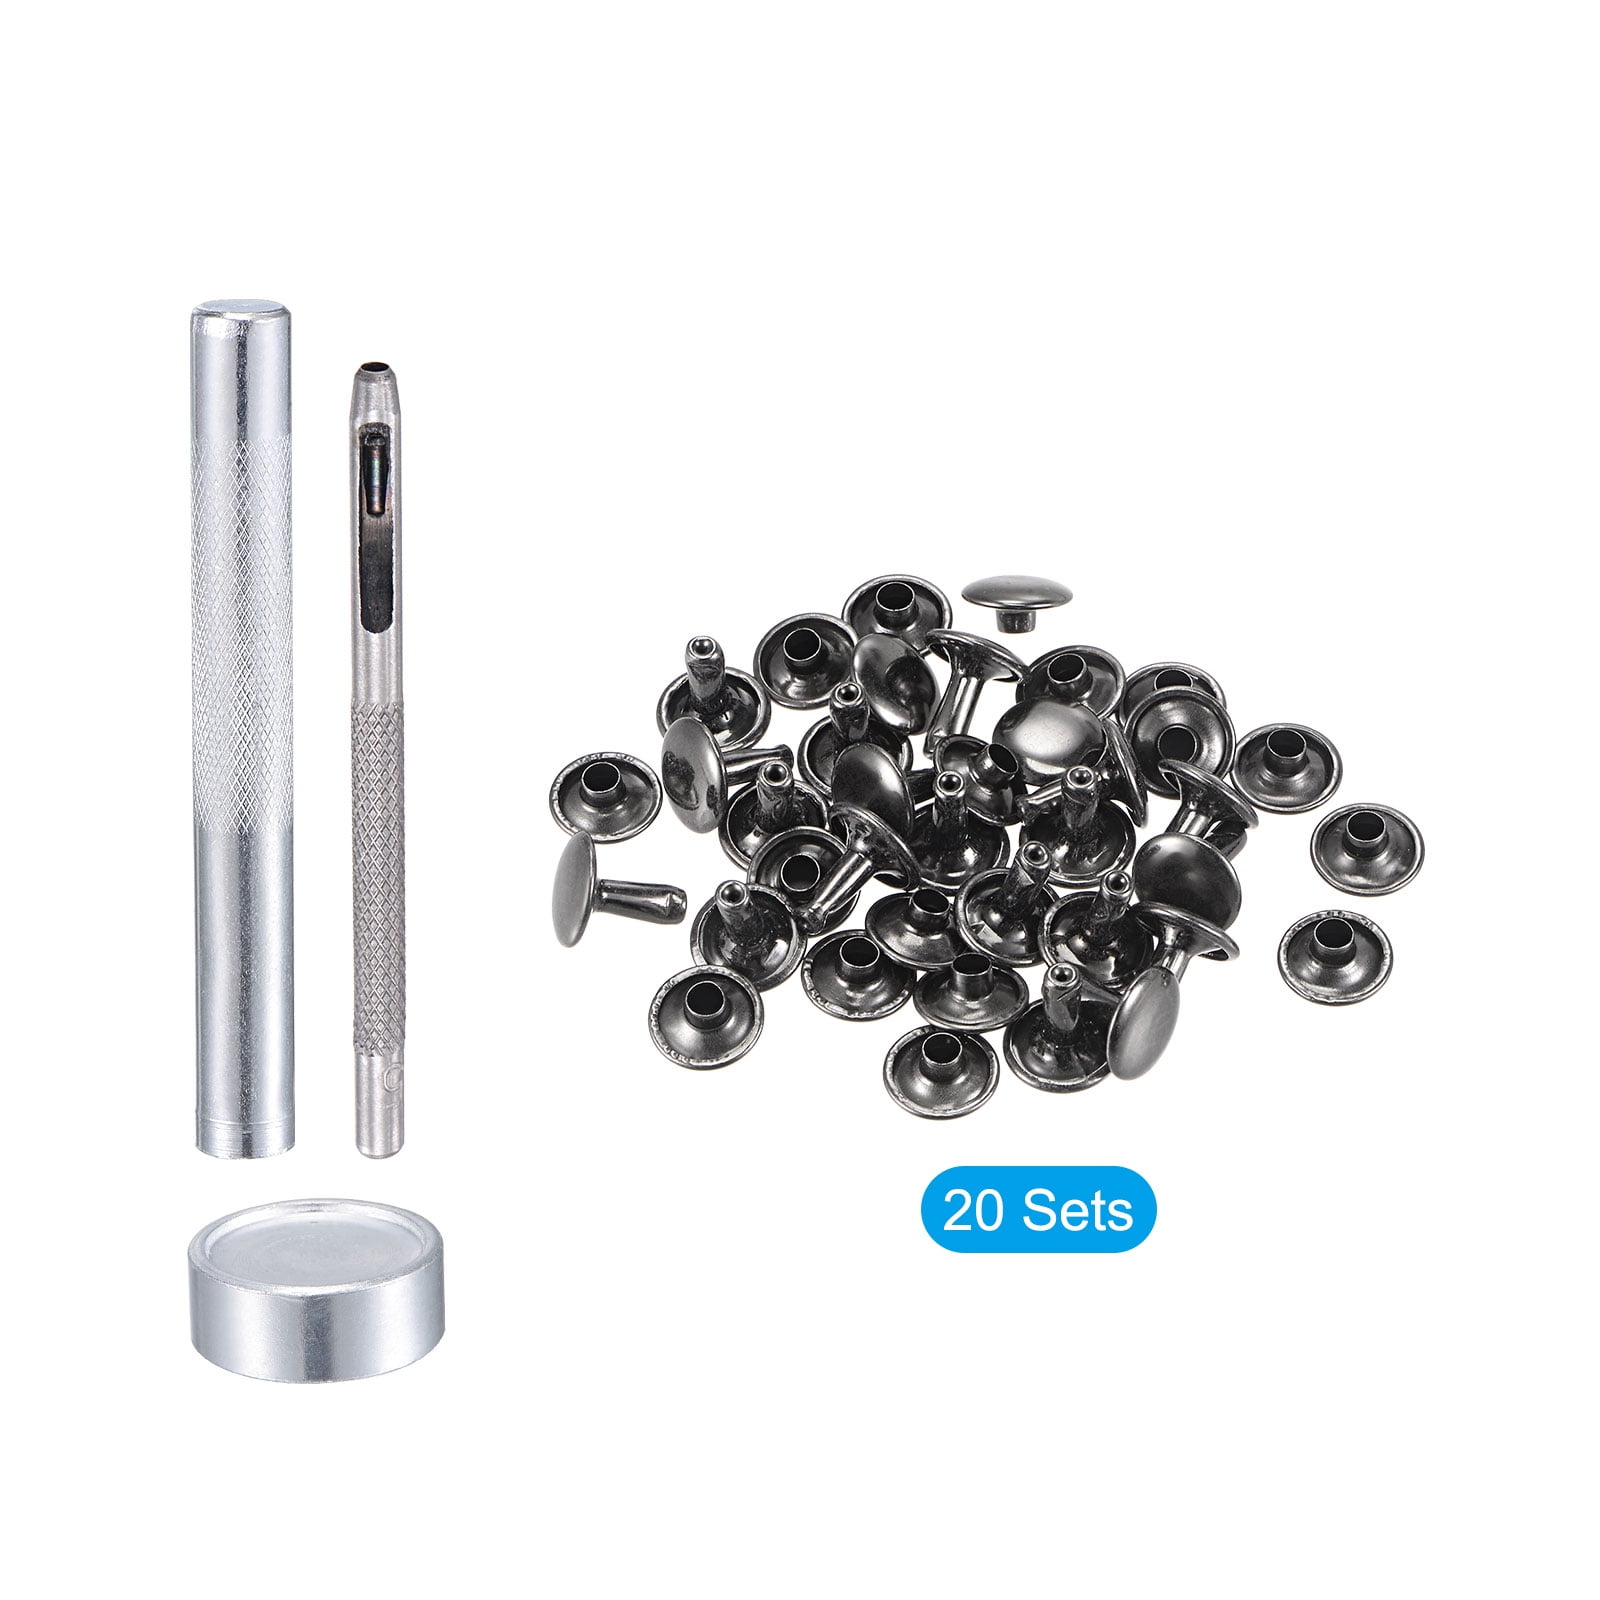  100 X 10Mm Gun Metal Two Piece Double Cap Tubular Rivets for  Leather Crafts - Stud Decoration for Handbags, Jeans, Belts, Dog Collars -  Sturdy Fastener for Sewing and Clothing Repair 